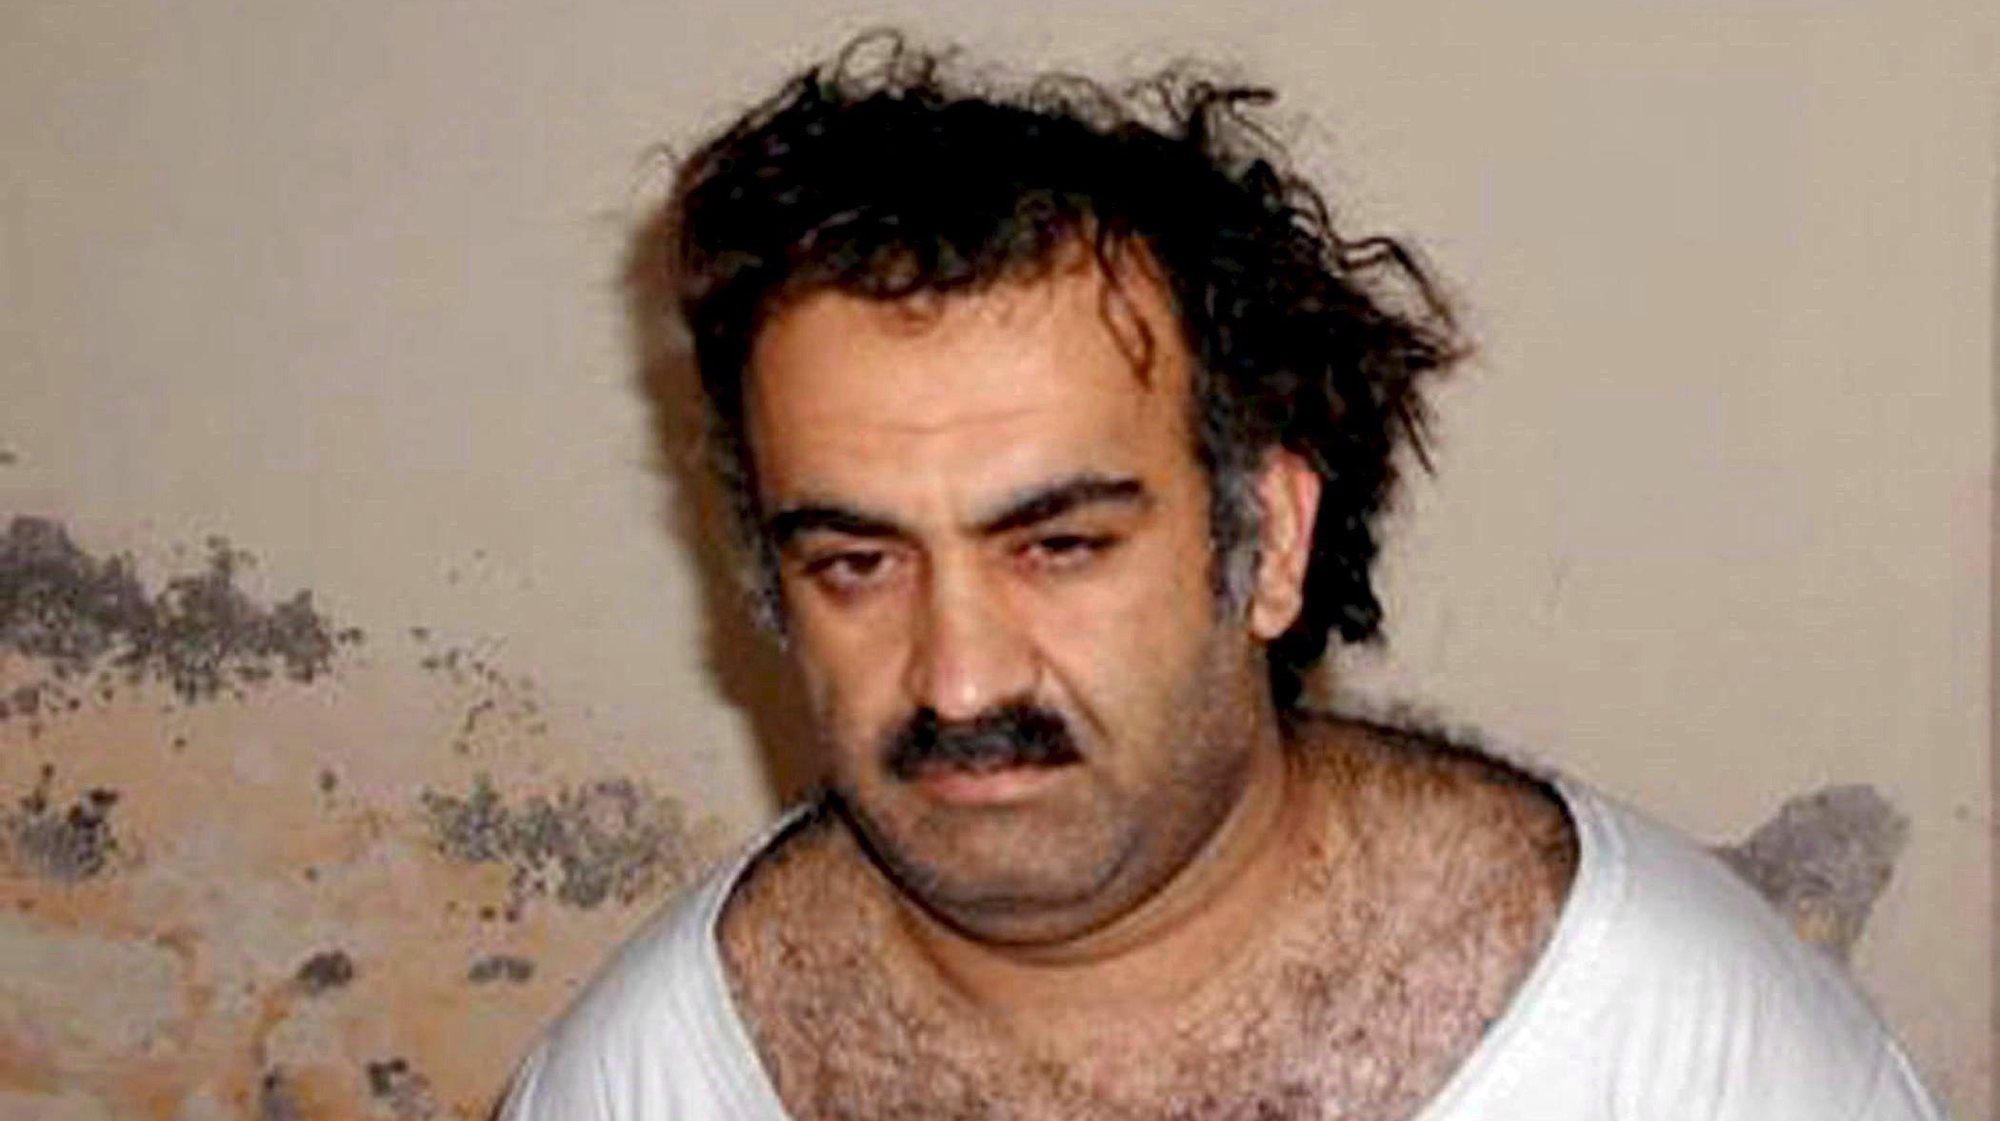 epa03206657 (FILE) A handout photo obtained 01 March 2003, showing Al-Qaeda operative Khalid Sheikh Mohammed shortly after his capture, in Rawalpindi, Pakistan. A group of five alleged terrorists, Ramzi Binalshibh, Ali Abdul Aziz Ali, Mustafa Ahmed al-Hawsawi and Walid bin Attas, led by alleged mastermind Khalid Sheikh Mohammed are to appear before a military tribunal in Guantanamo 05 May 2012 to hear the charges against them. According to the Pentagon, the charges related to 11 September 2001 terrorist attacks in USA include terrorism, hijacking aircraft, conspiracy, murder, attacking civilians, intentionally causing serious bodily injury and destruction of property.  EPA/HANDOUT  HANDOUT EDITORIAL USE ONLY/NO SALES *** Local Caption *** 00000402670123